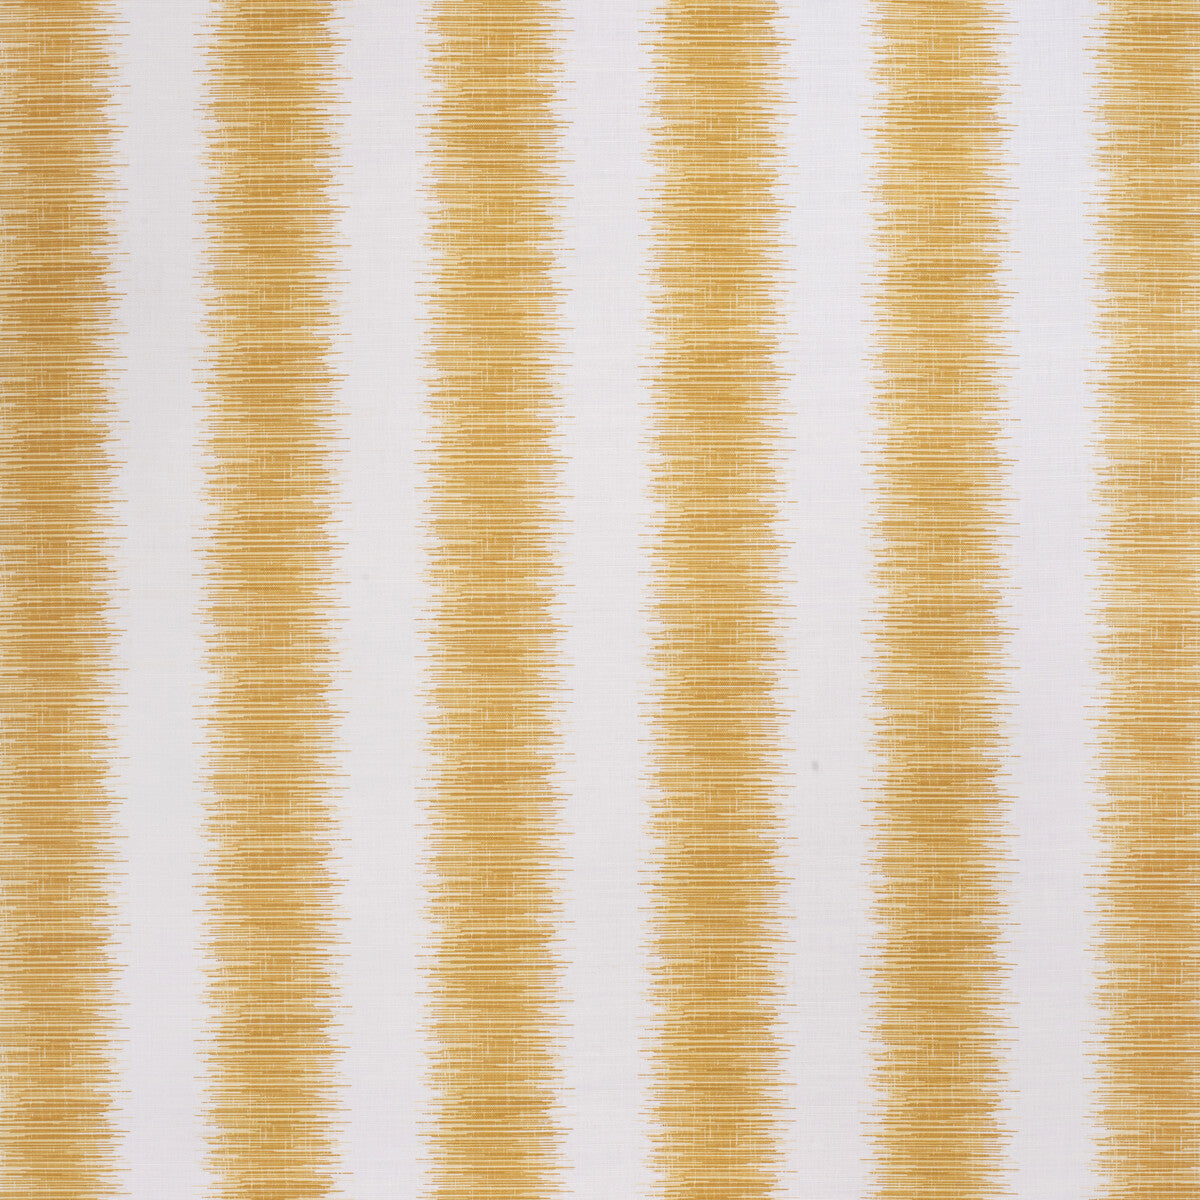 Hampton Stripe fabric in amber/whi color - pattern 2020135.401.0 - by Lee Jofa in the Paolo Moschino Fabrics collection